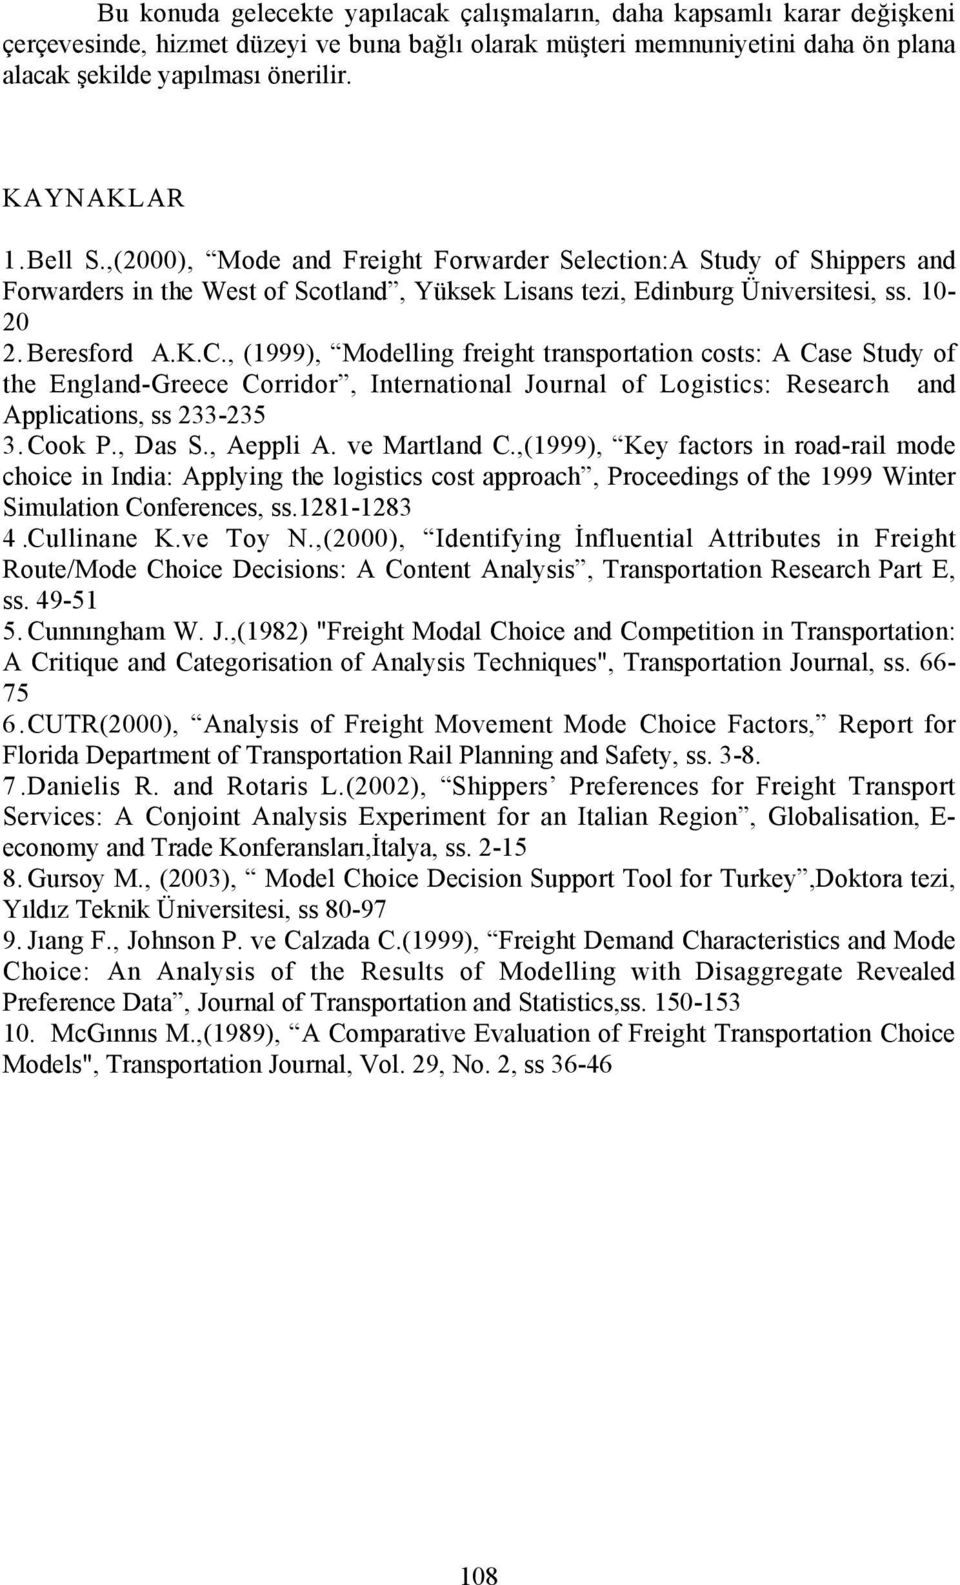 , (1999), Modelling freight transportation costs: A Case Study of the England-Greece Corridor, International Journal of Logistics: Research and Applications, ss 233-235 3. Cook P., Das S., Aeppli A.